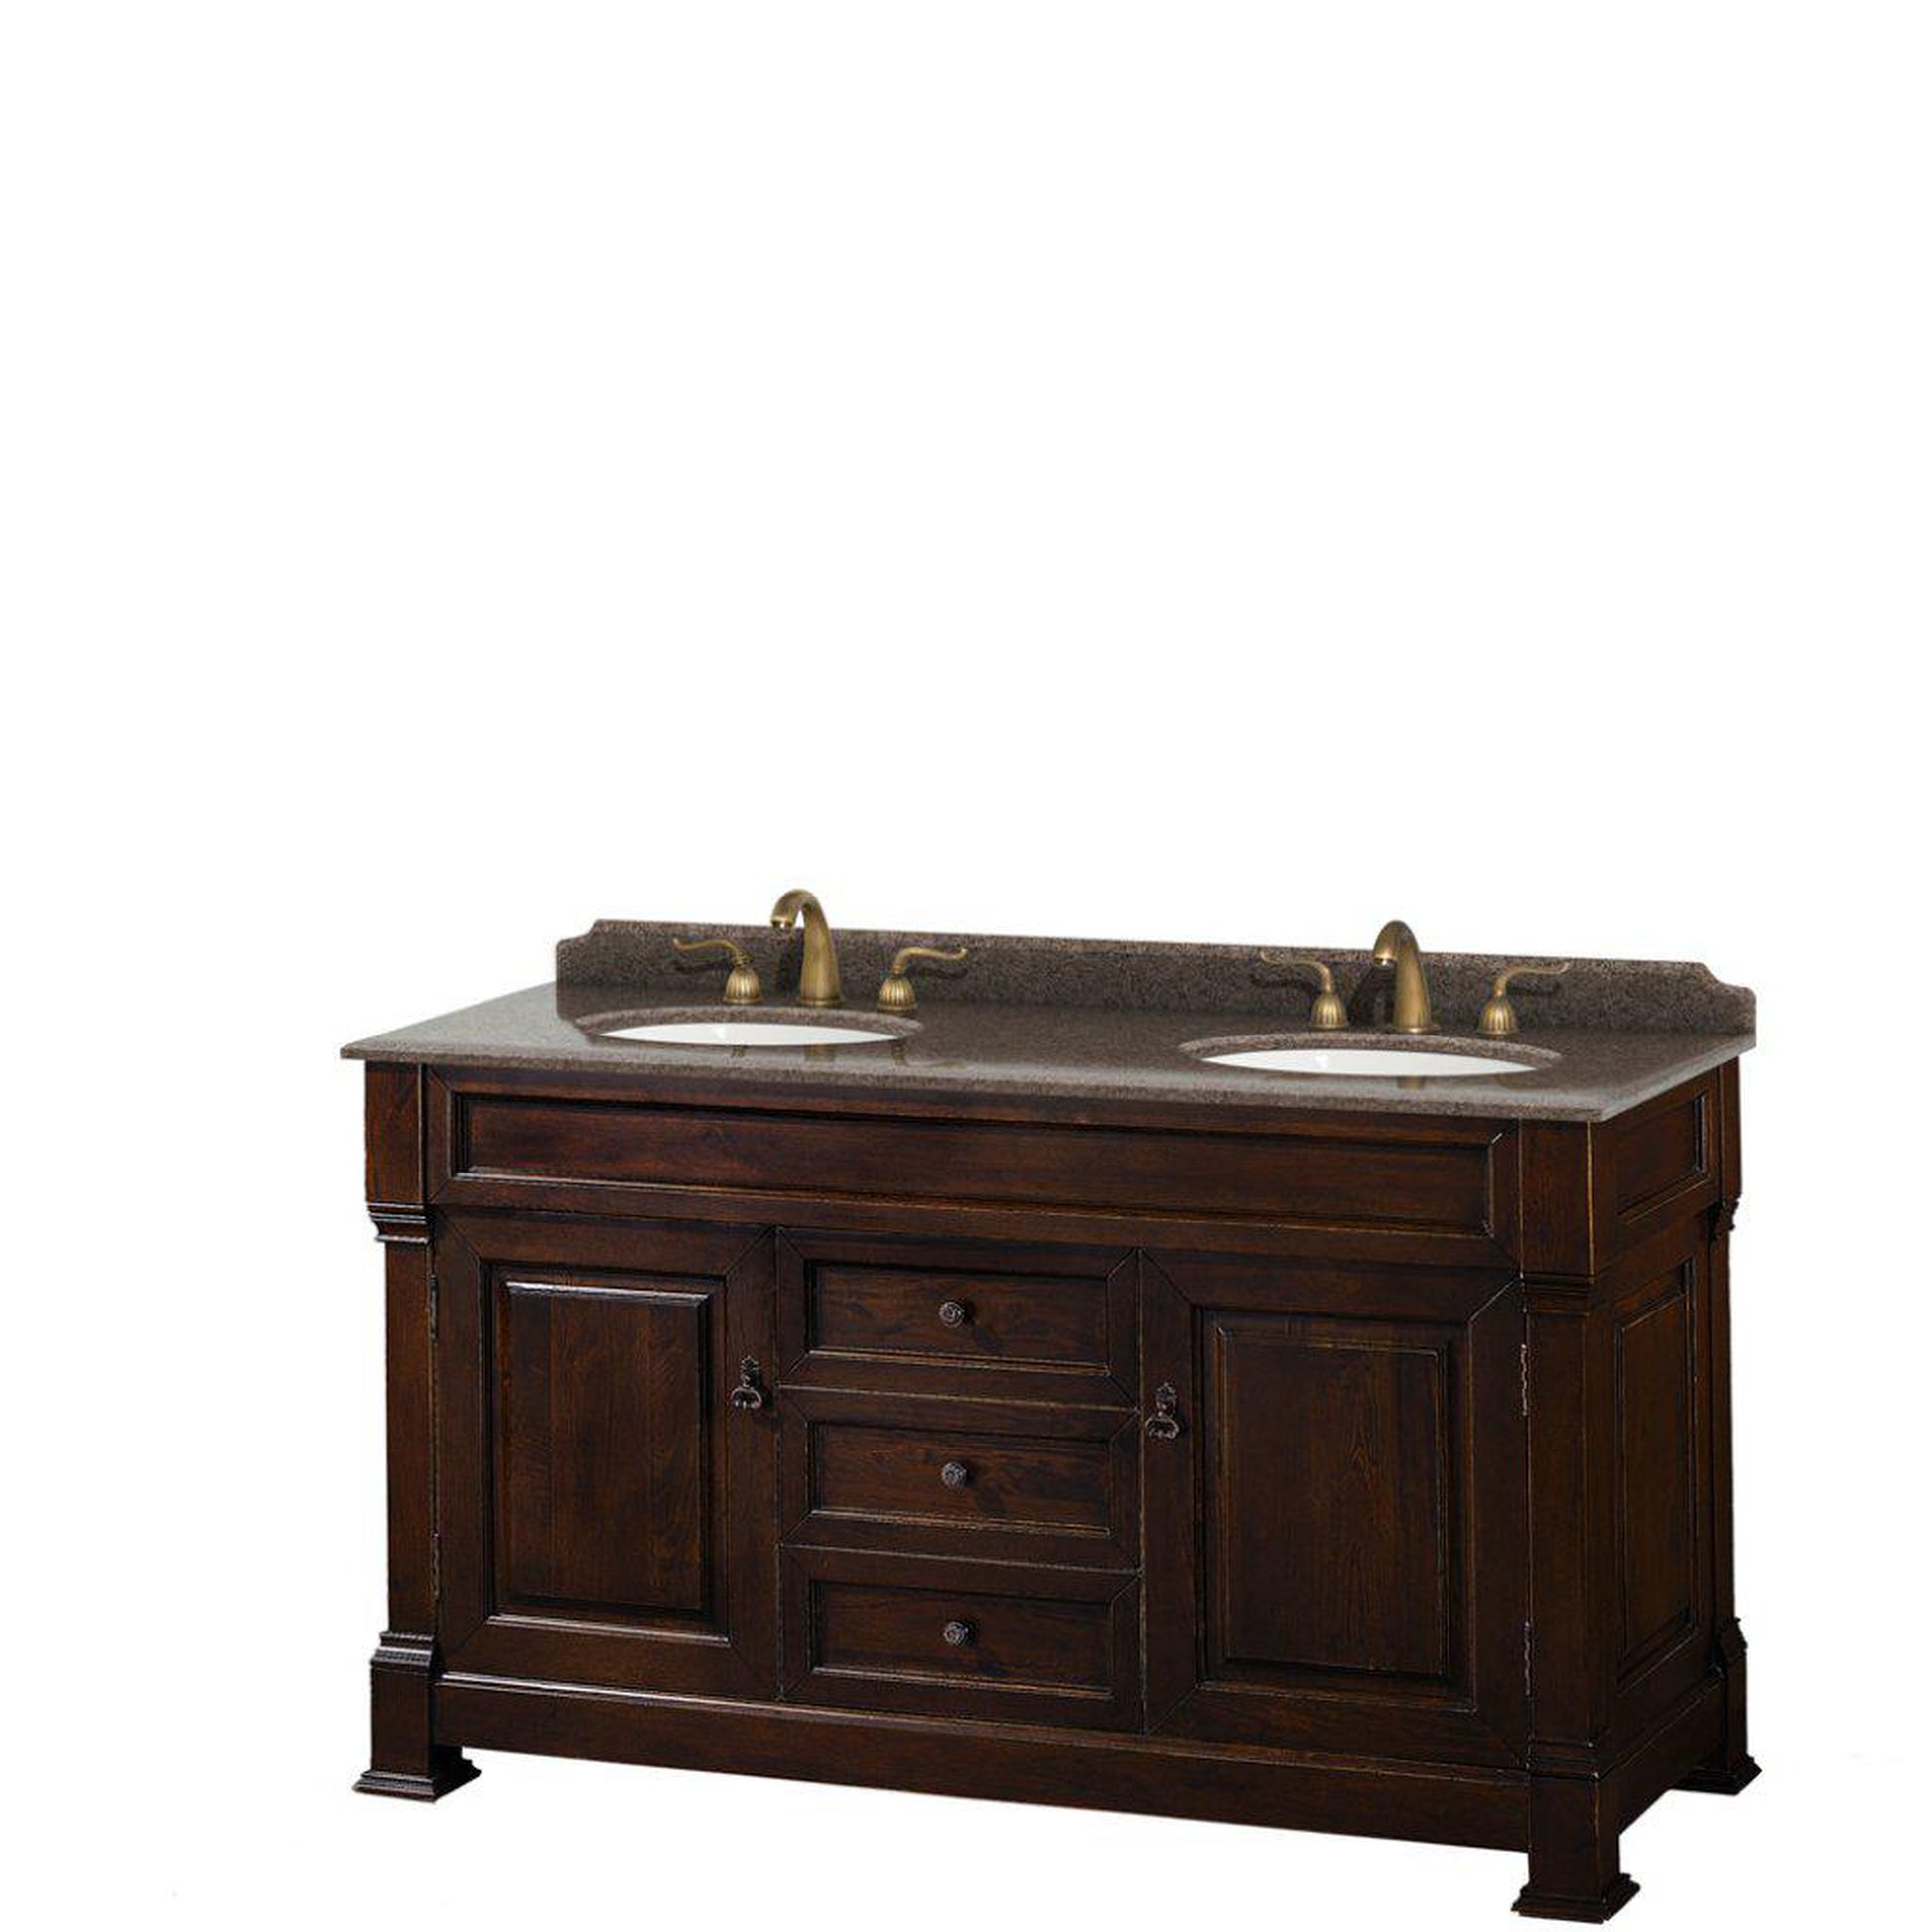 Wyndham Collection Andover 60" Double Bathroom Dark Cherry Vanity With Imperial Brown Granite Countertop And Undermount Oval Sink, And No Mirror